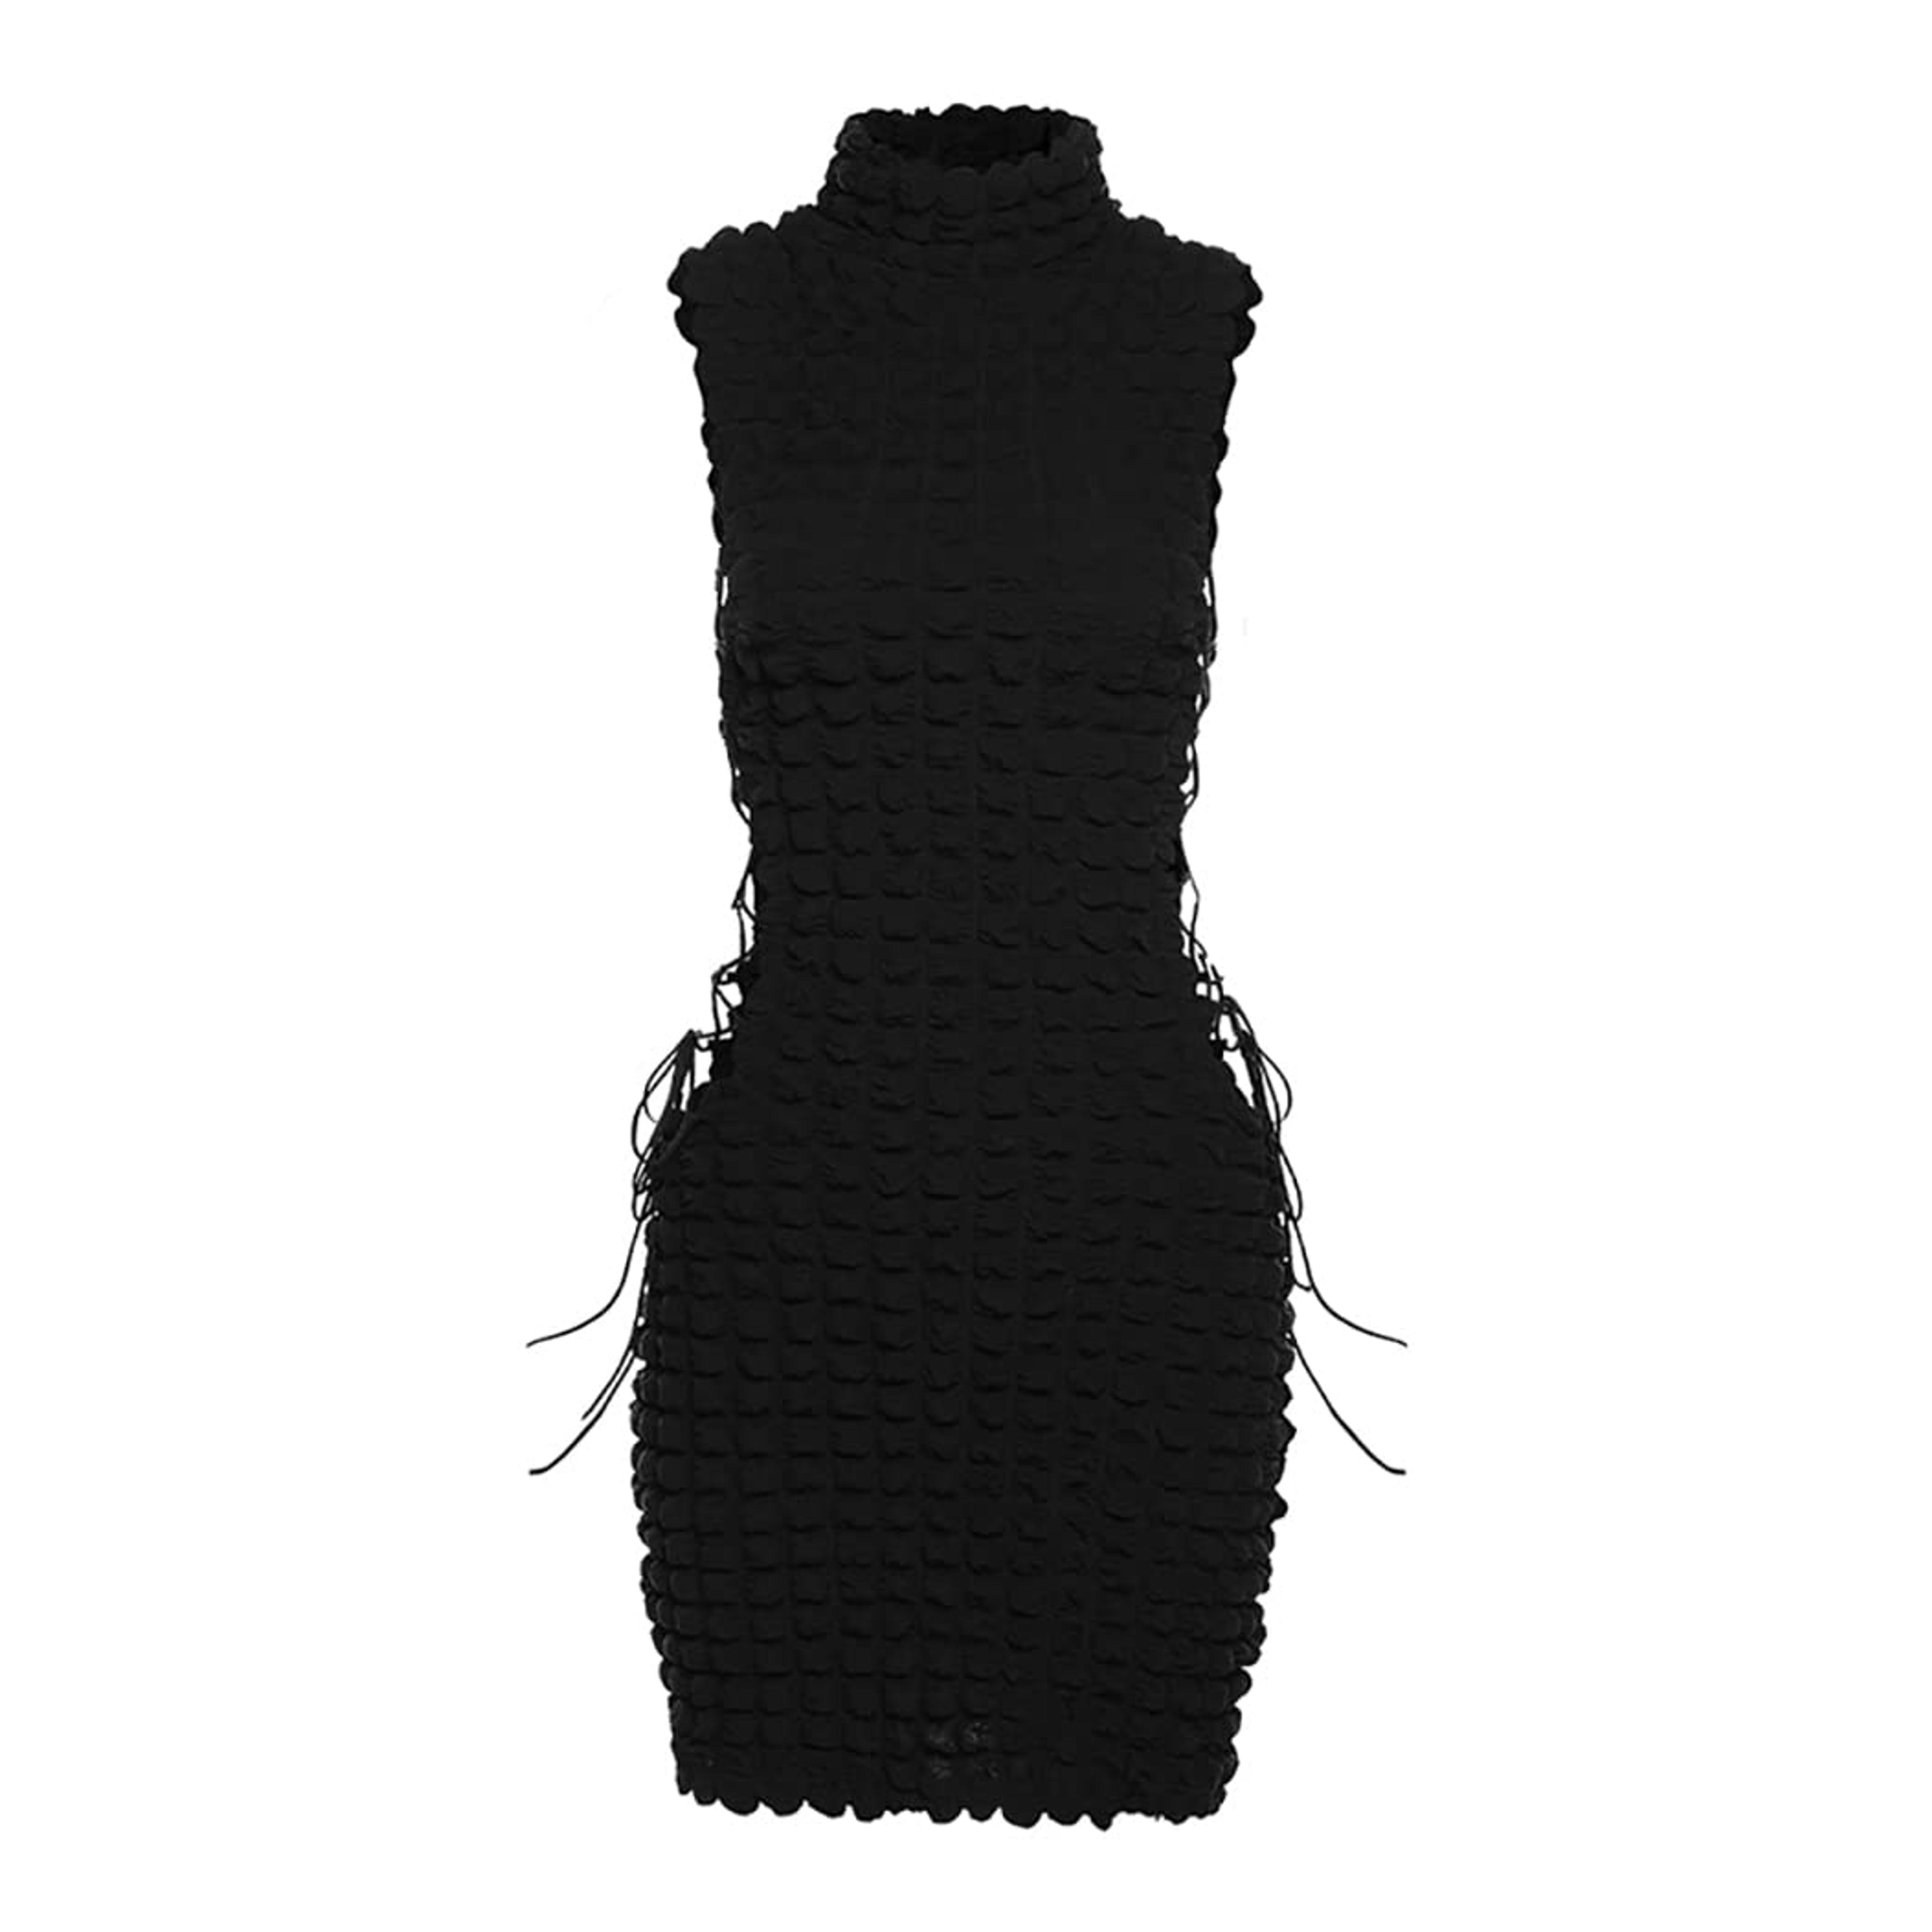 DOUCIU Women's Stacked Mini Dress High Neck Sleeveless Hollow Out Lace Bodycon Party Clubwear Dresses at Amazon Women’s Clothing store